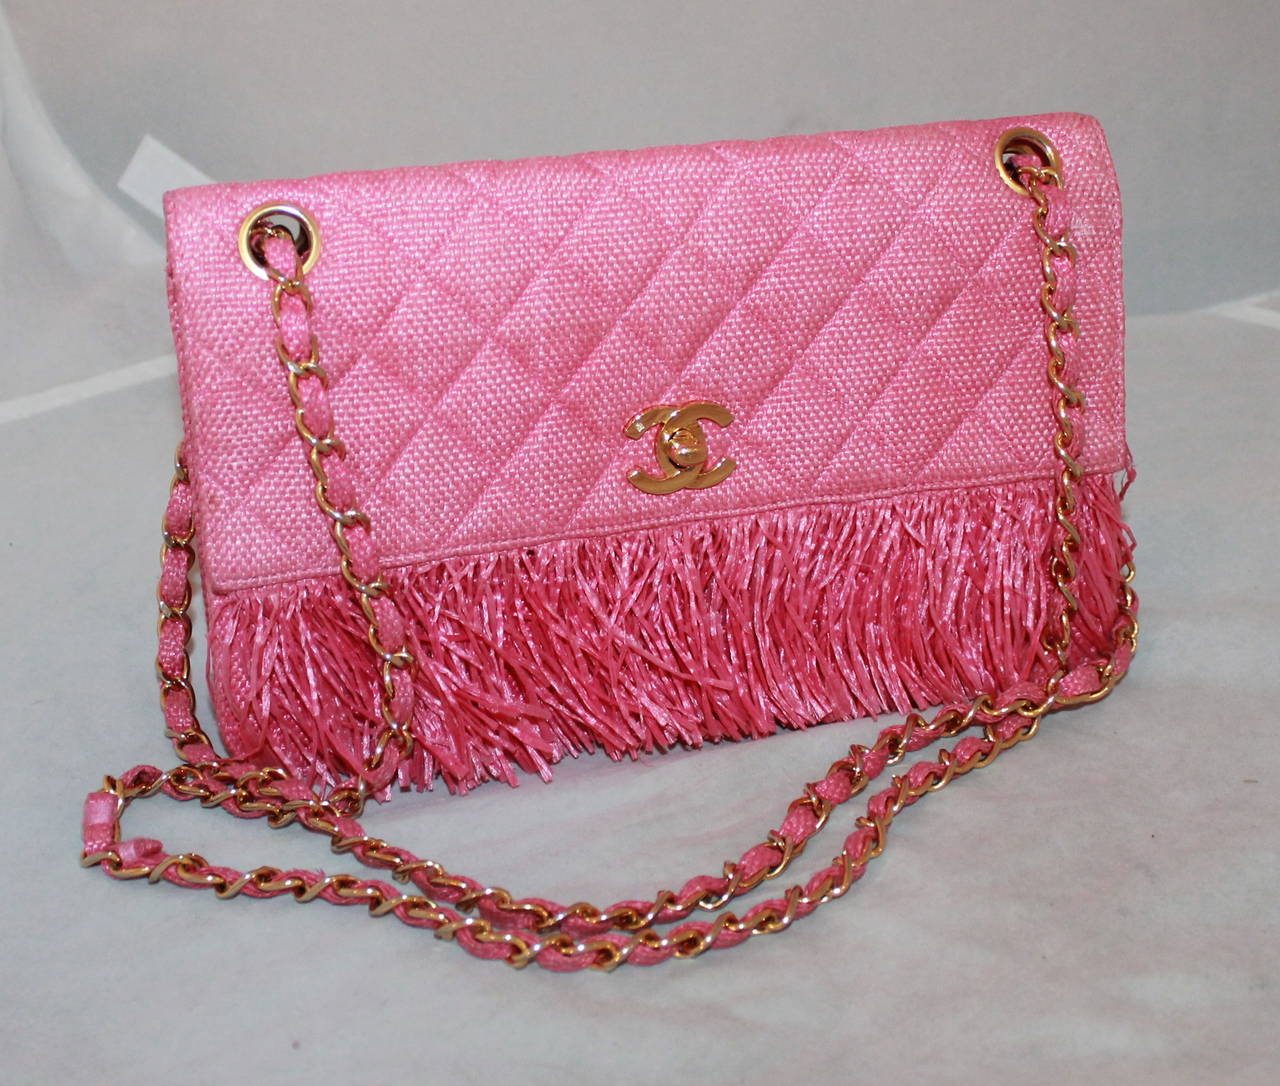 Chanel Vintage Pink Raffia & Fringe Single Flap Handbag - circa 1992. This bag is in very good condition with the exception of one area on the backside of the bag near the bottom. That area has dirt stains which appear in image #4.